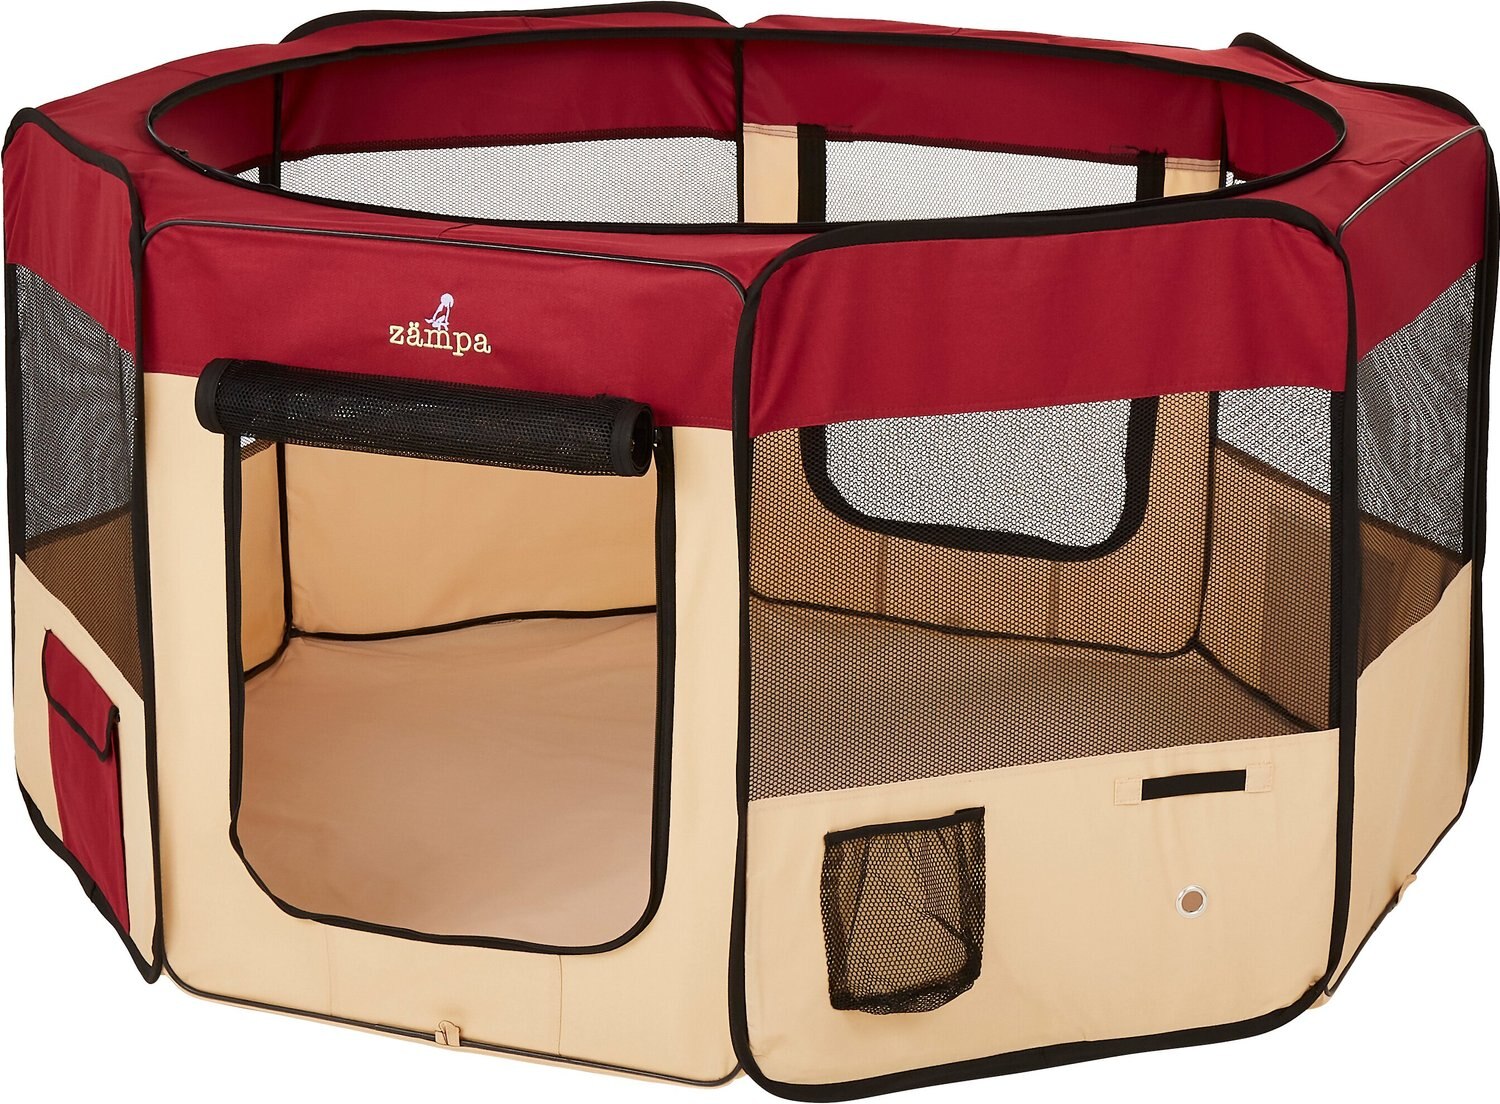 ZAMPA Pet Folding Soft sided Dog amp Cat Playpen Red Large Chewy com